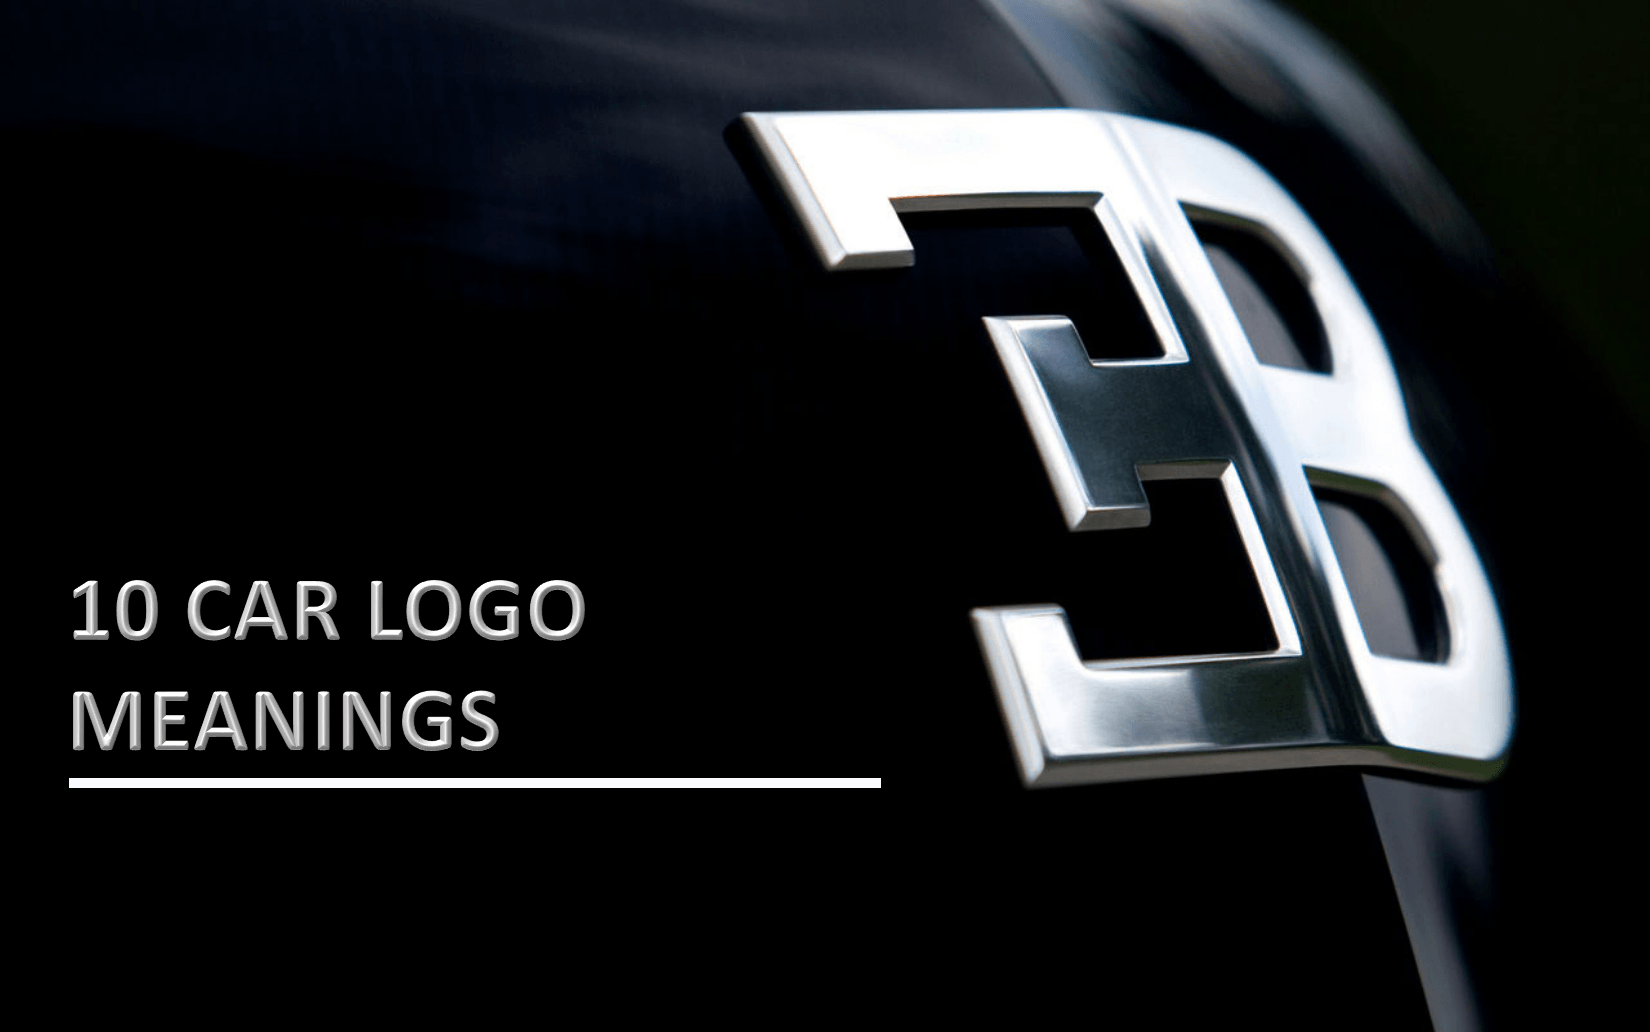 Luxury Car Logo - 10 Car Logo Meanings You May Not Expect - CAR FROM JAPAN